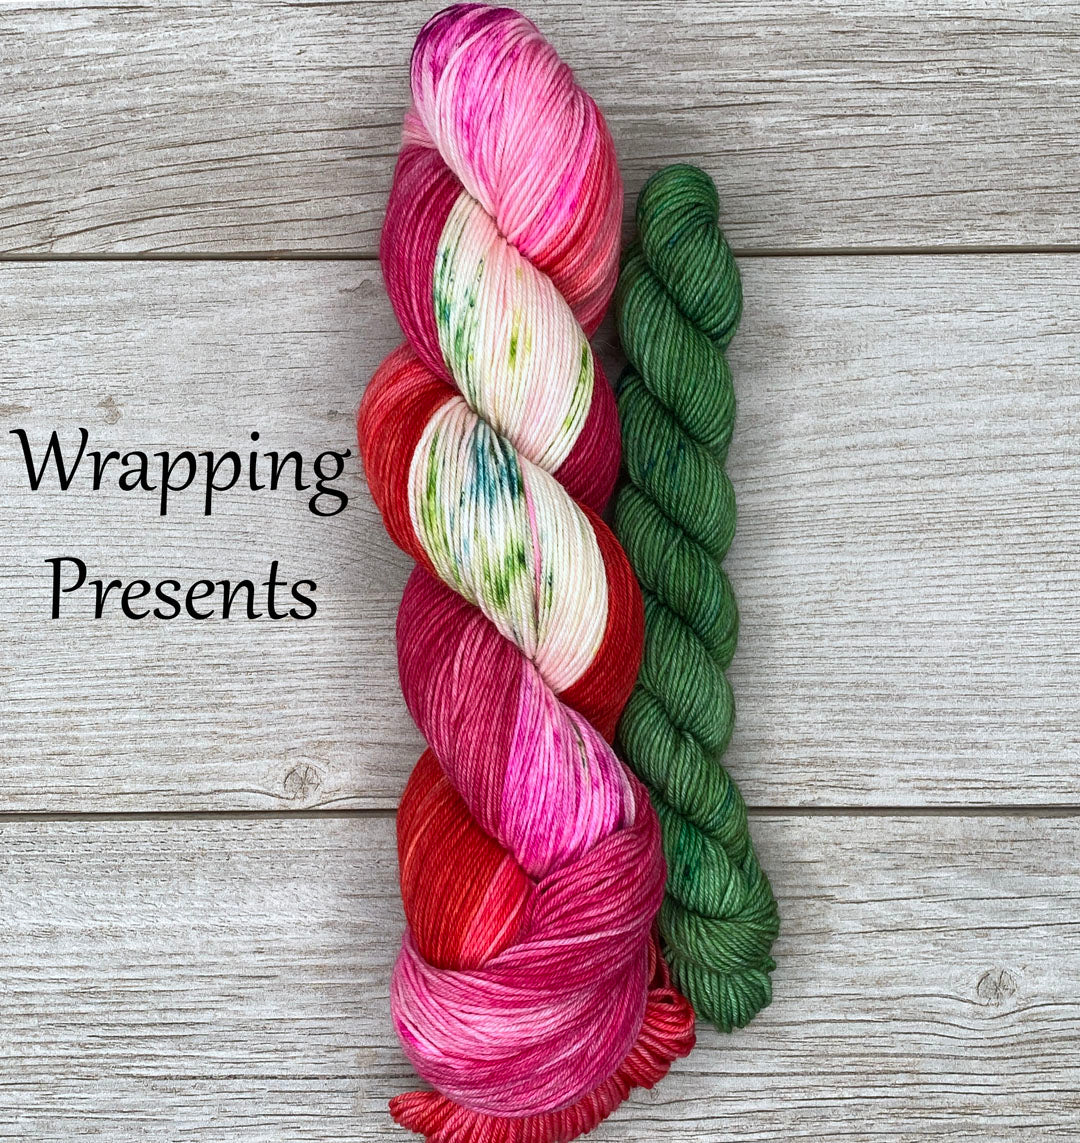 Wrapping Presents SOCK SET  |  SHEEPISHsock  |  fingering weight